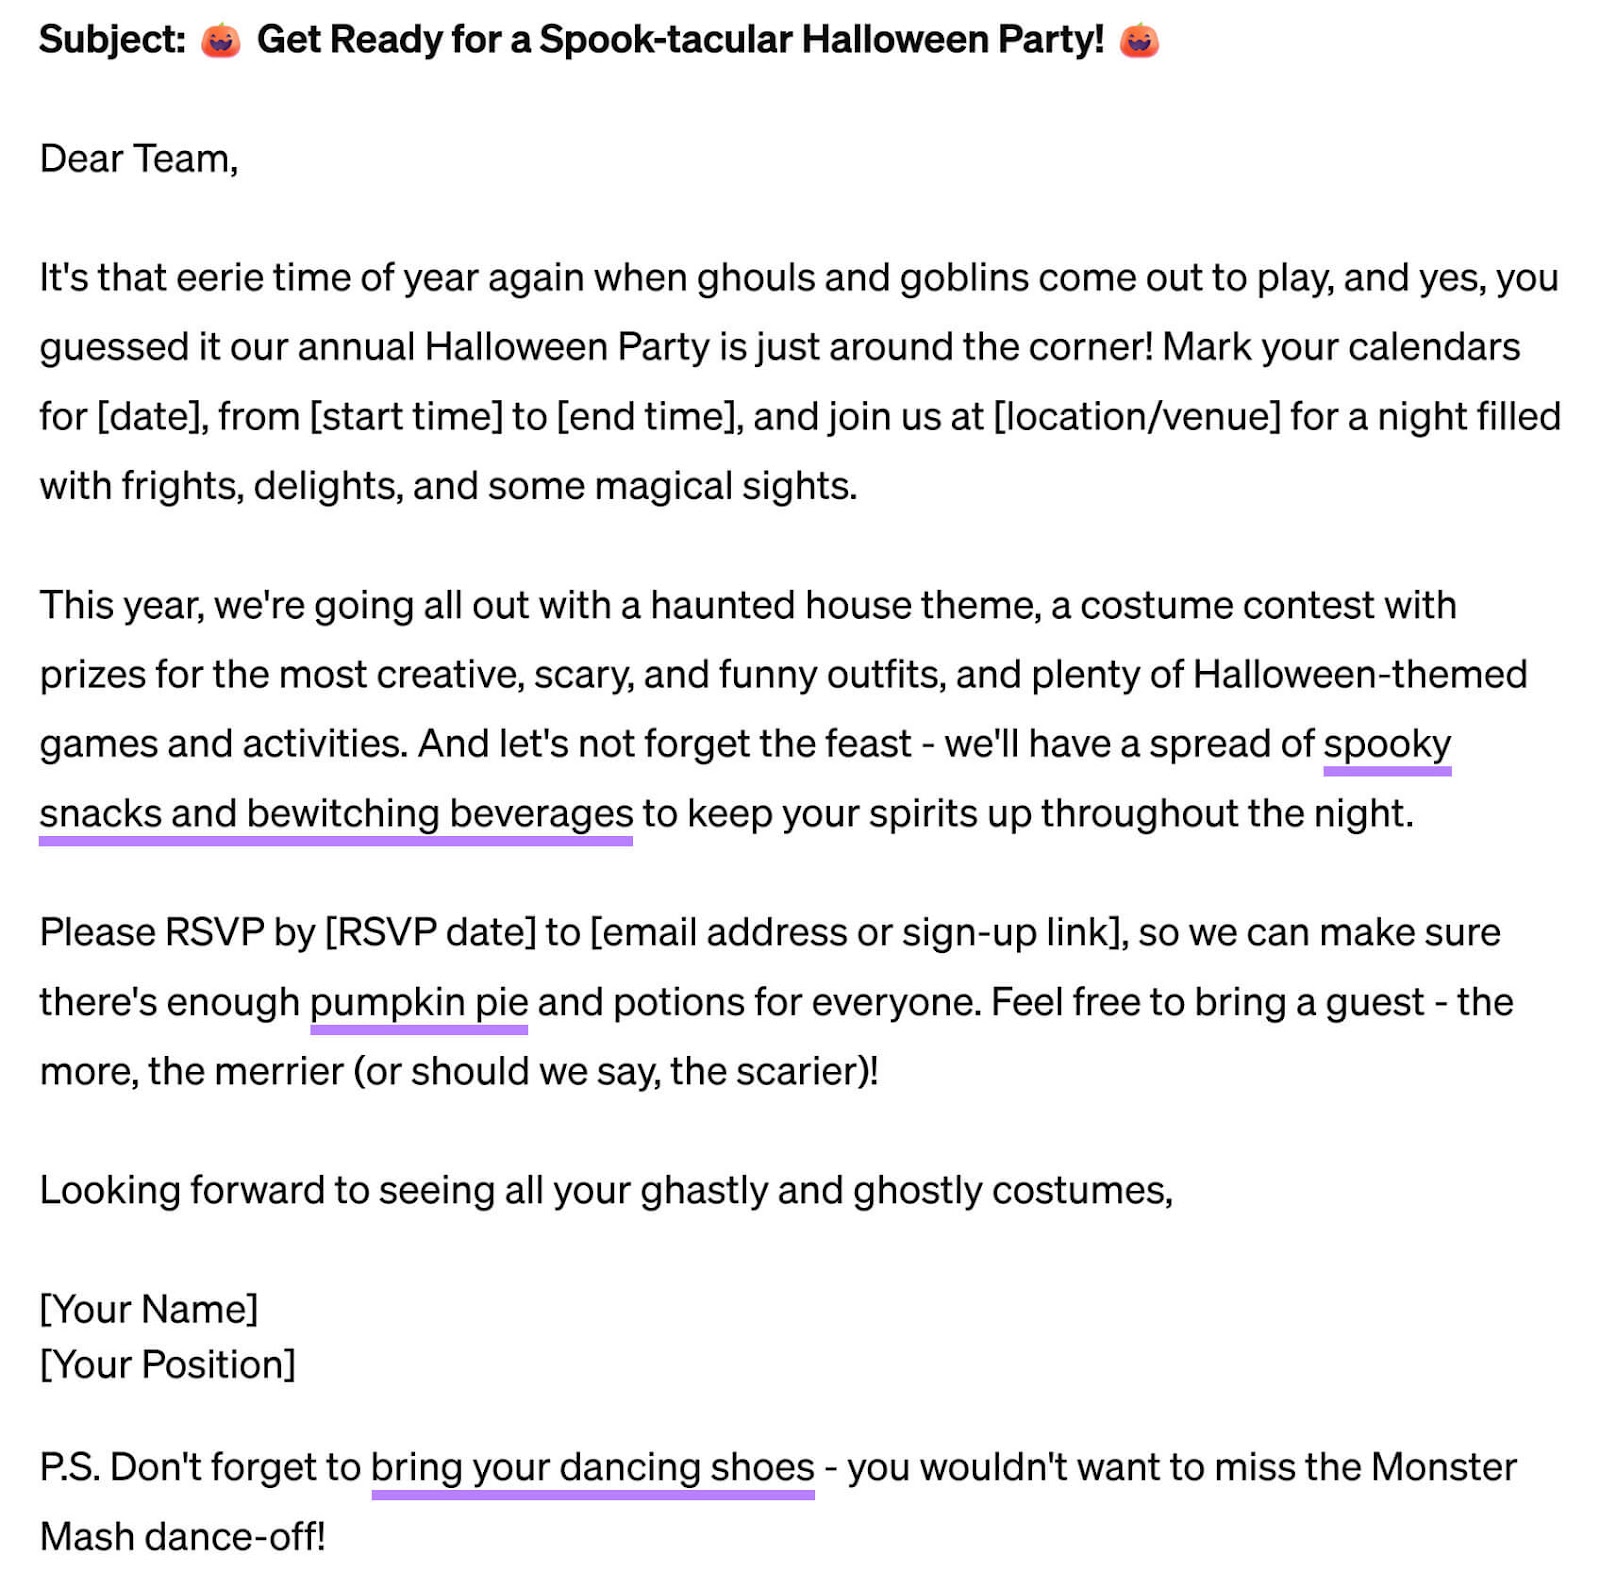 ChatGPT-generated email announcement about the office Halloween party